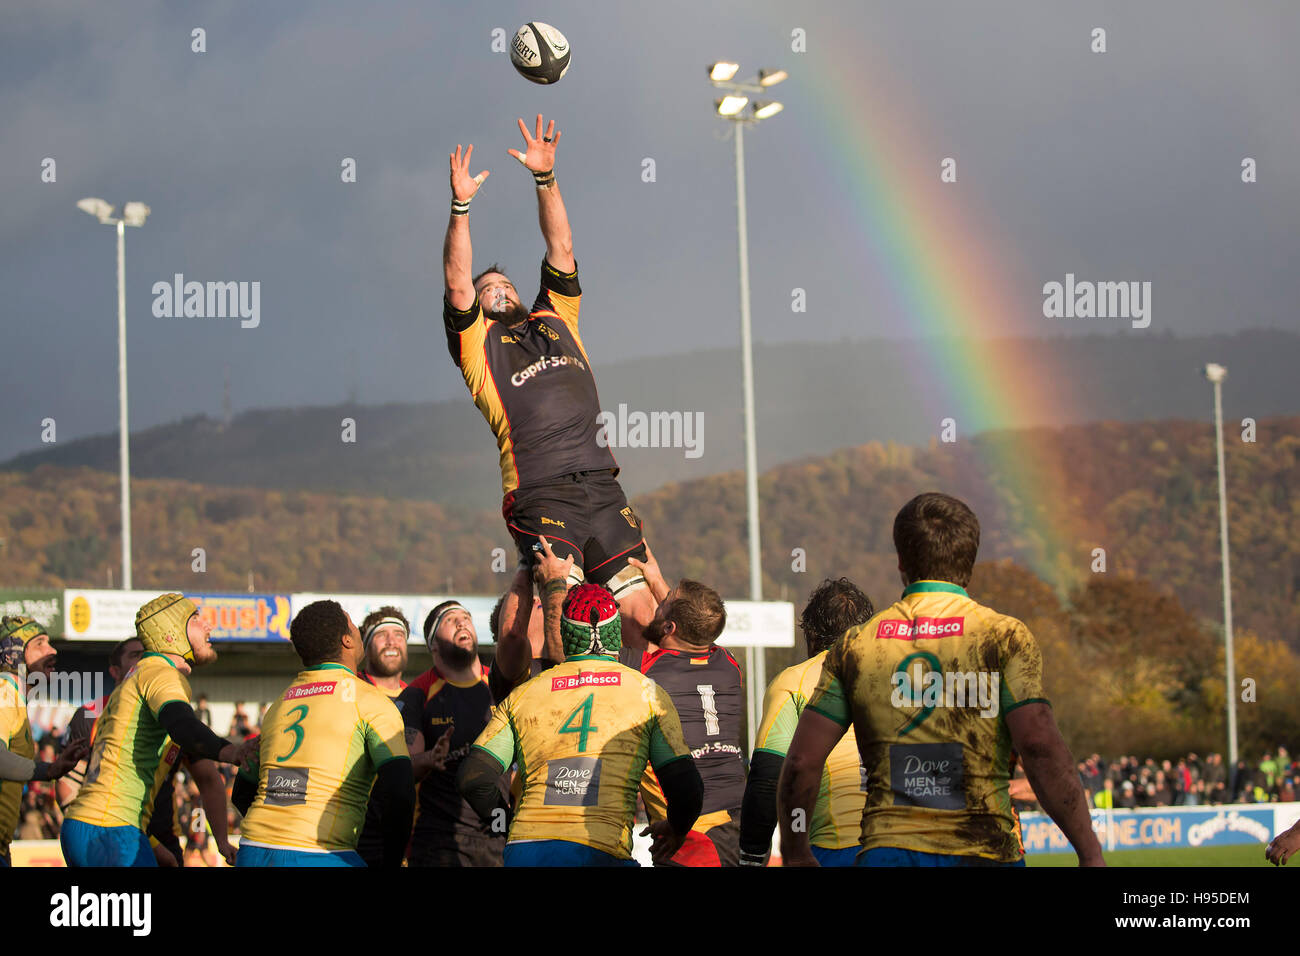 Heidelberg, Germany. 19th Nov, 2016. Germany's national rugby team captain Michael Poppmeier catches the ball during the rugby world rankings game between Germany and Brazil in Heidelberg, Germany, 19 November 2016. Photo: Juergen Kessler/dpa/Alamy Live News Stock Photo